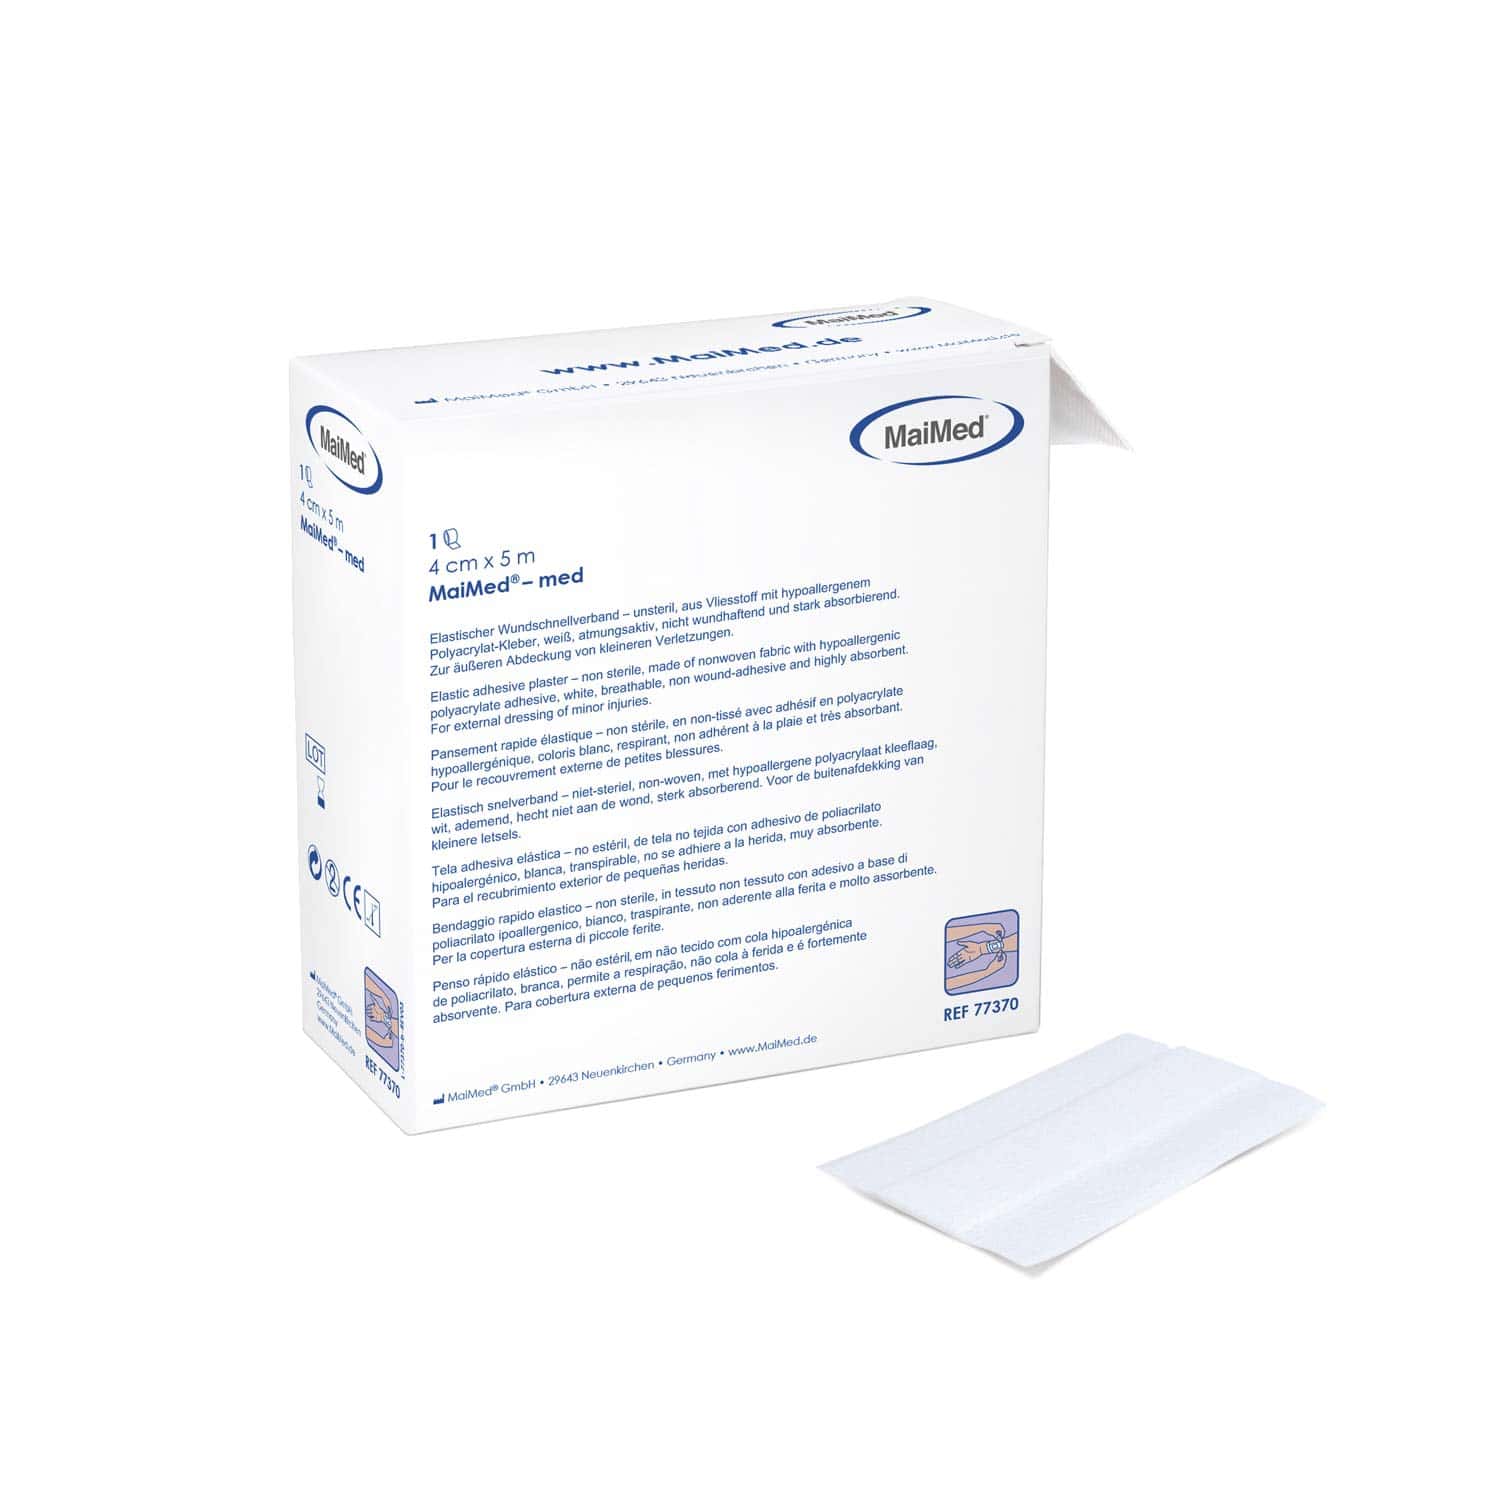 Maimed-Med – Hypoallergenic And Highly Absorbent Adhesive Plaster Roll 